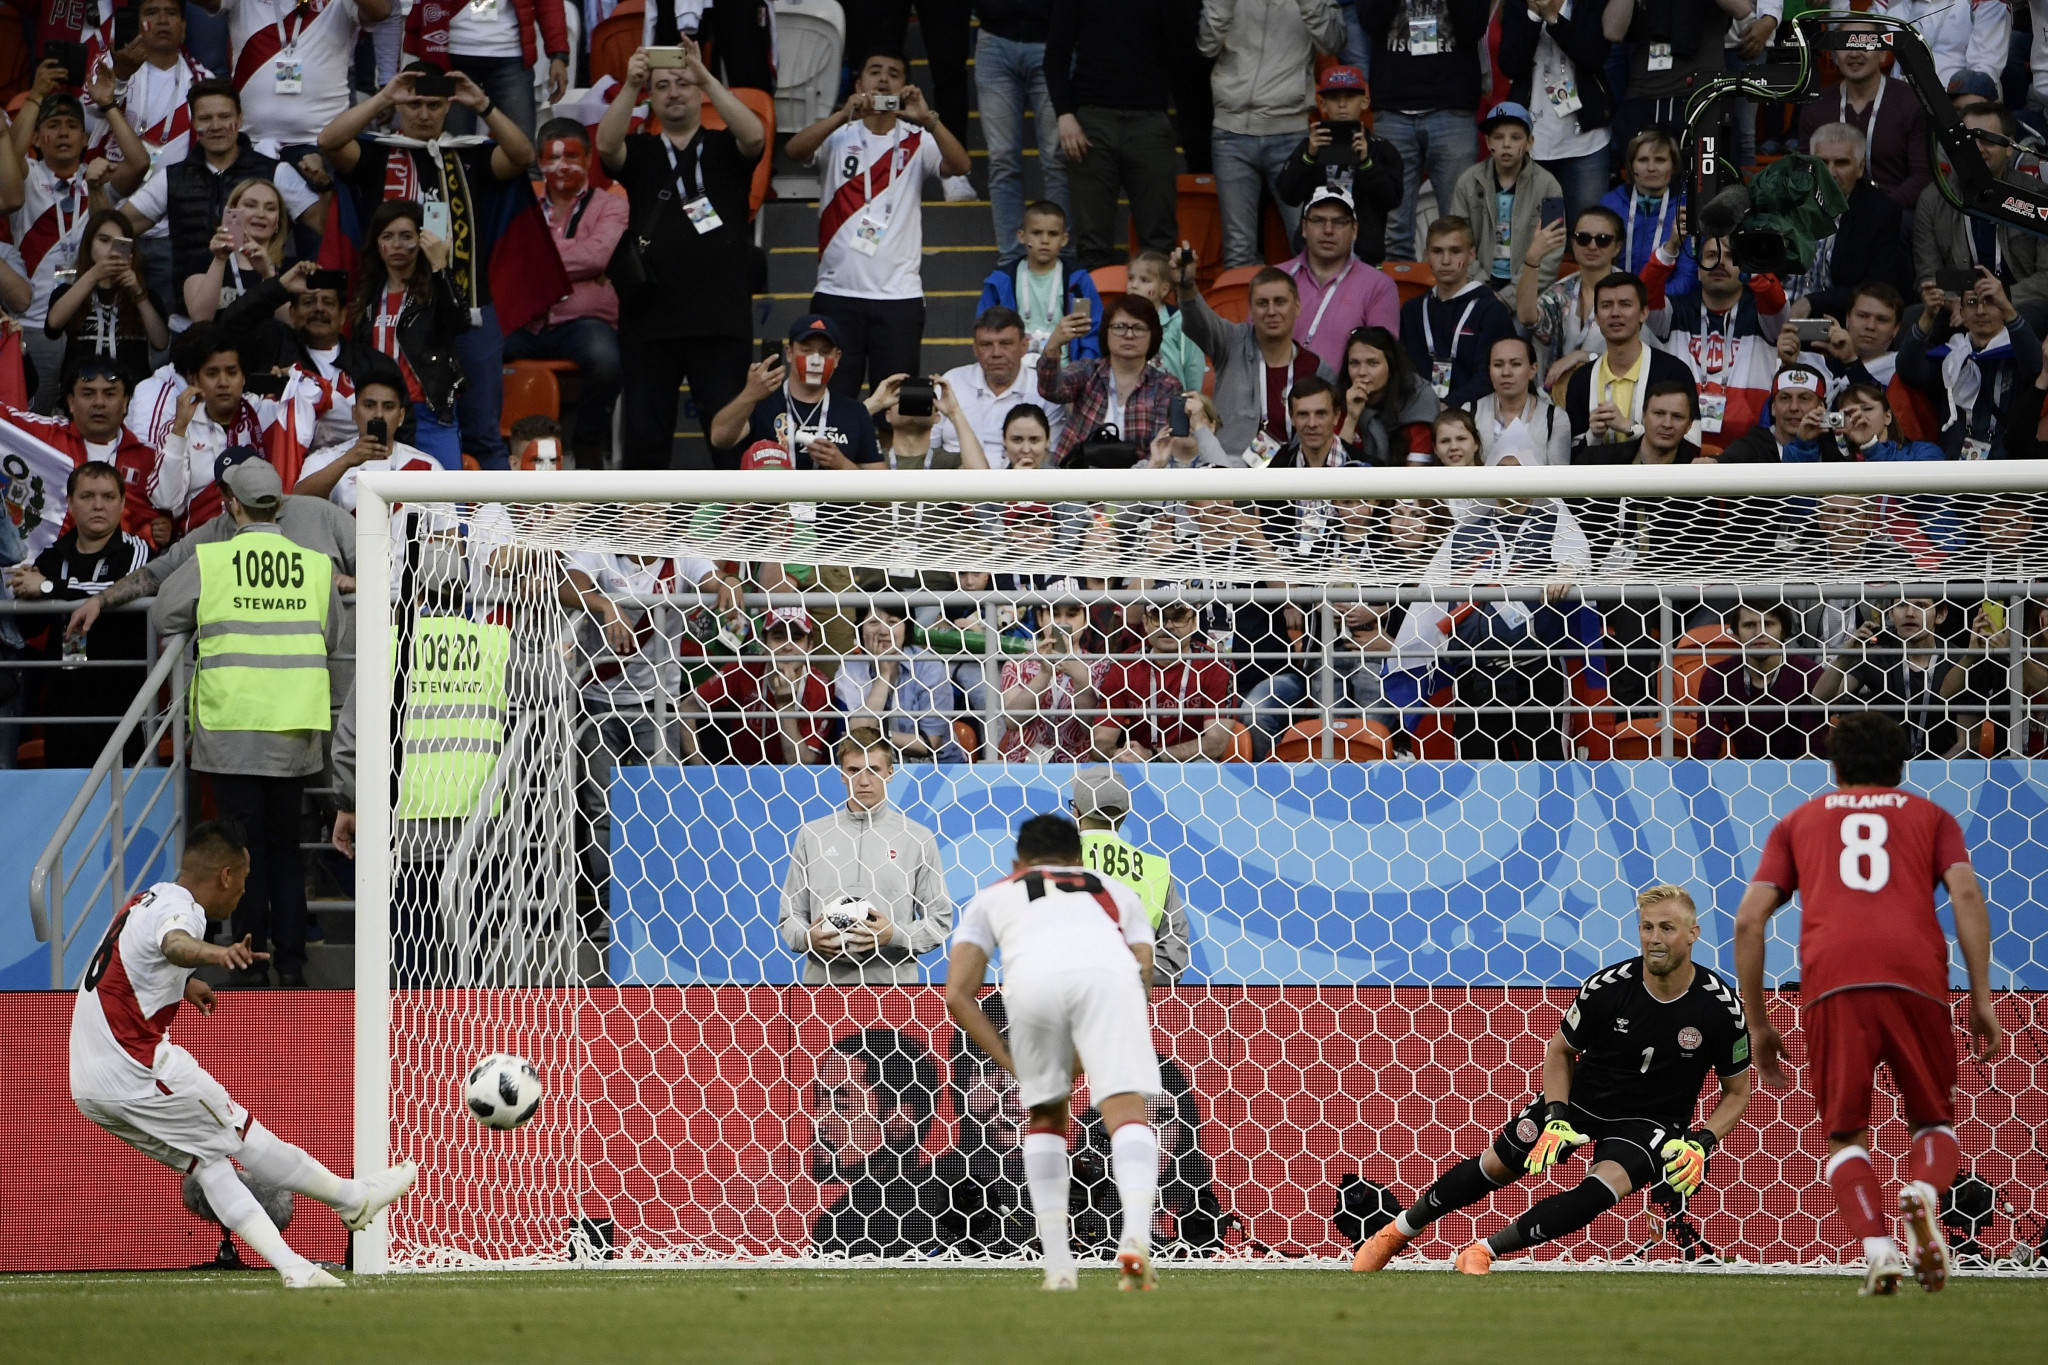 Peru missed a penalty before conceding the goal to Denmark ©Getty Images